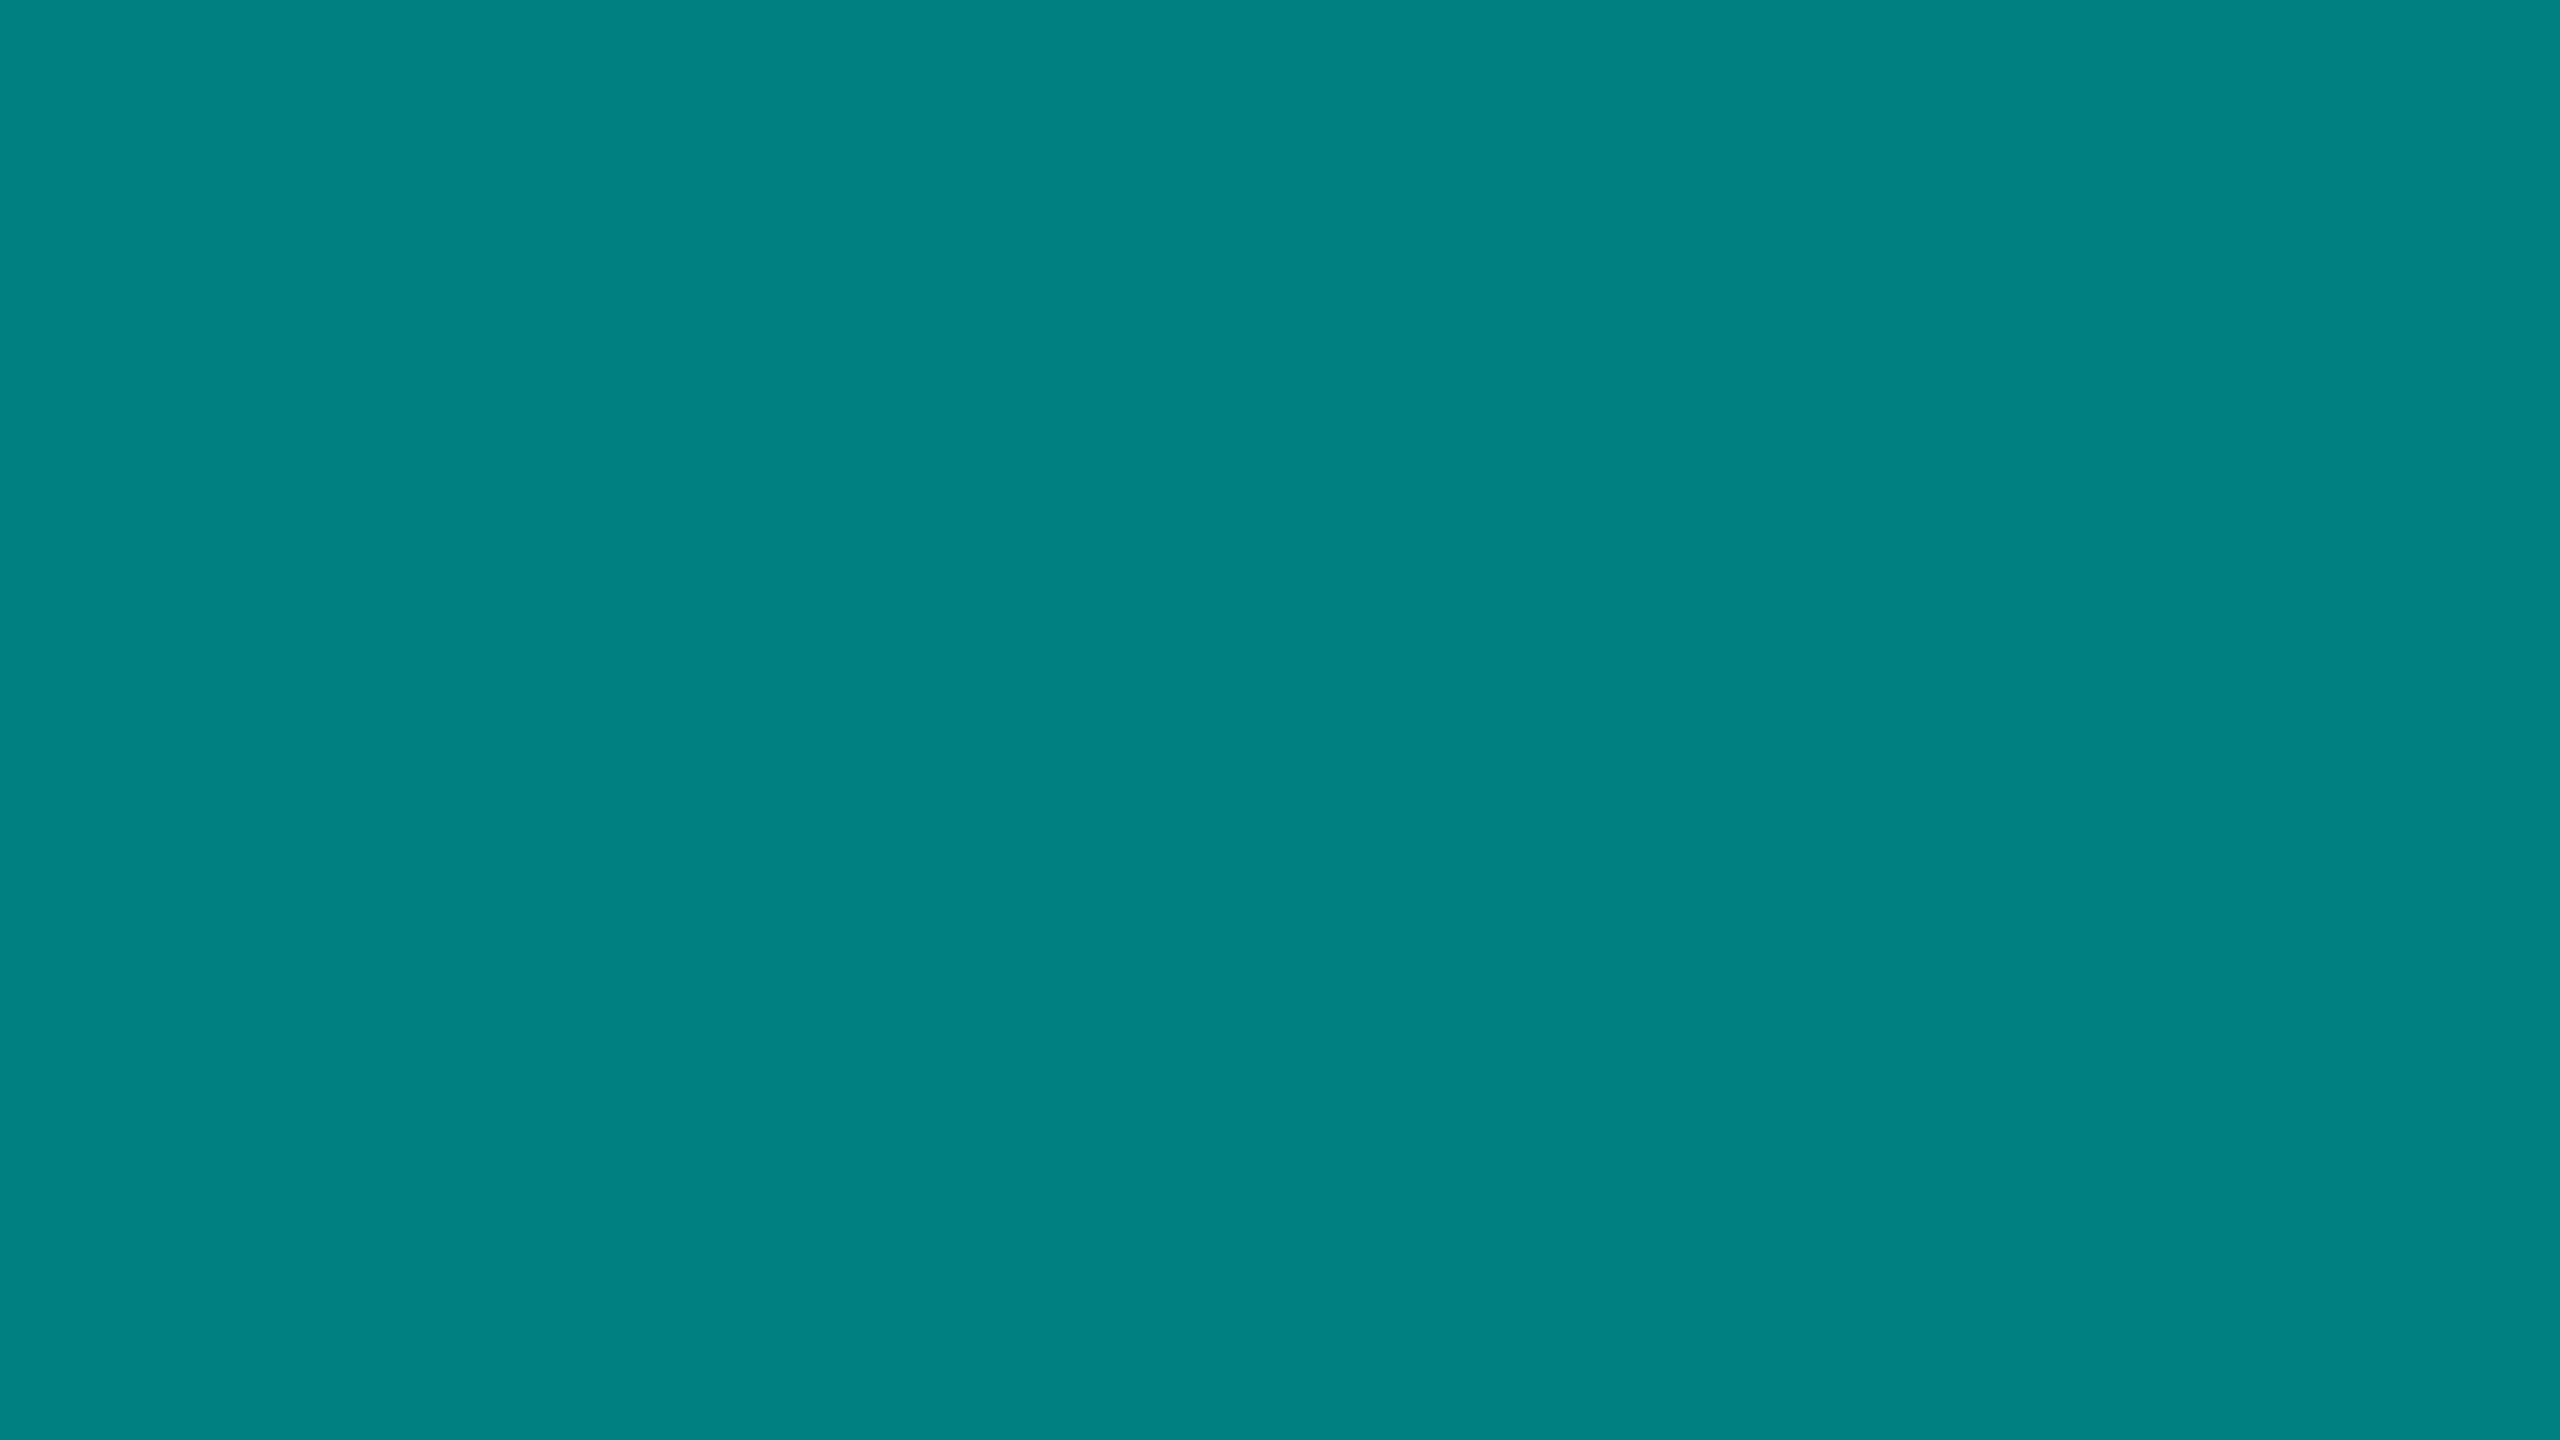 Teal Green Colouring S